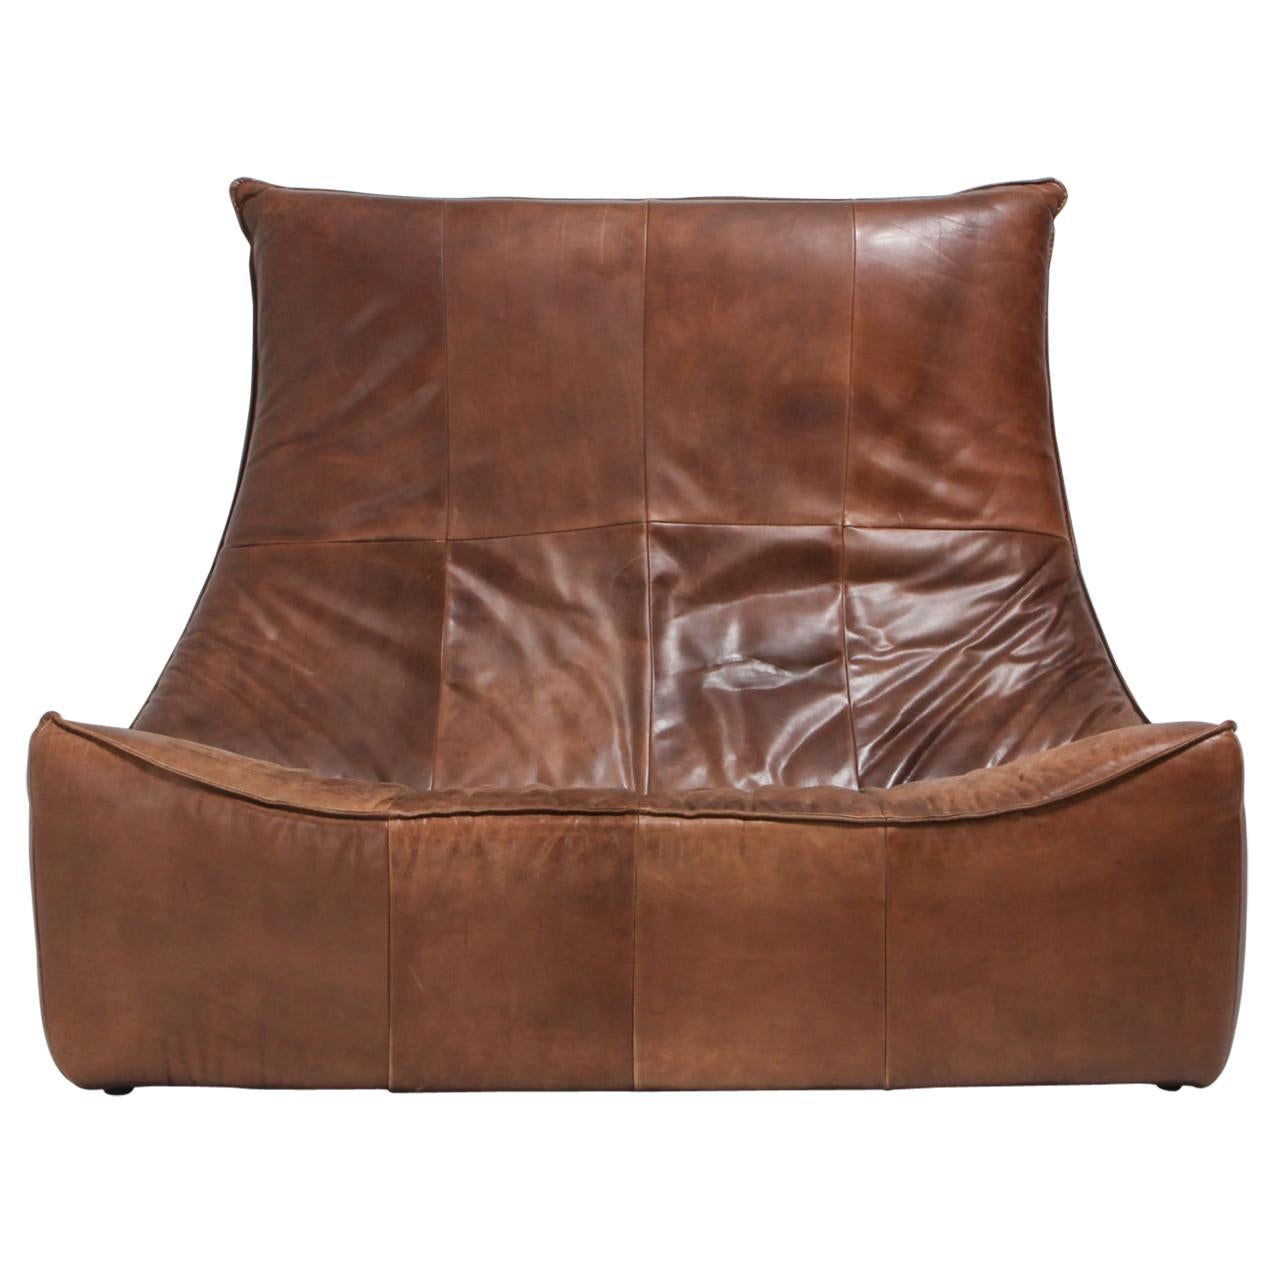 Vintage Patinated Leather Couch 'The Rock' by Gerard Van Den Berg for Montis II